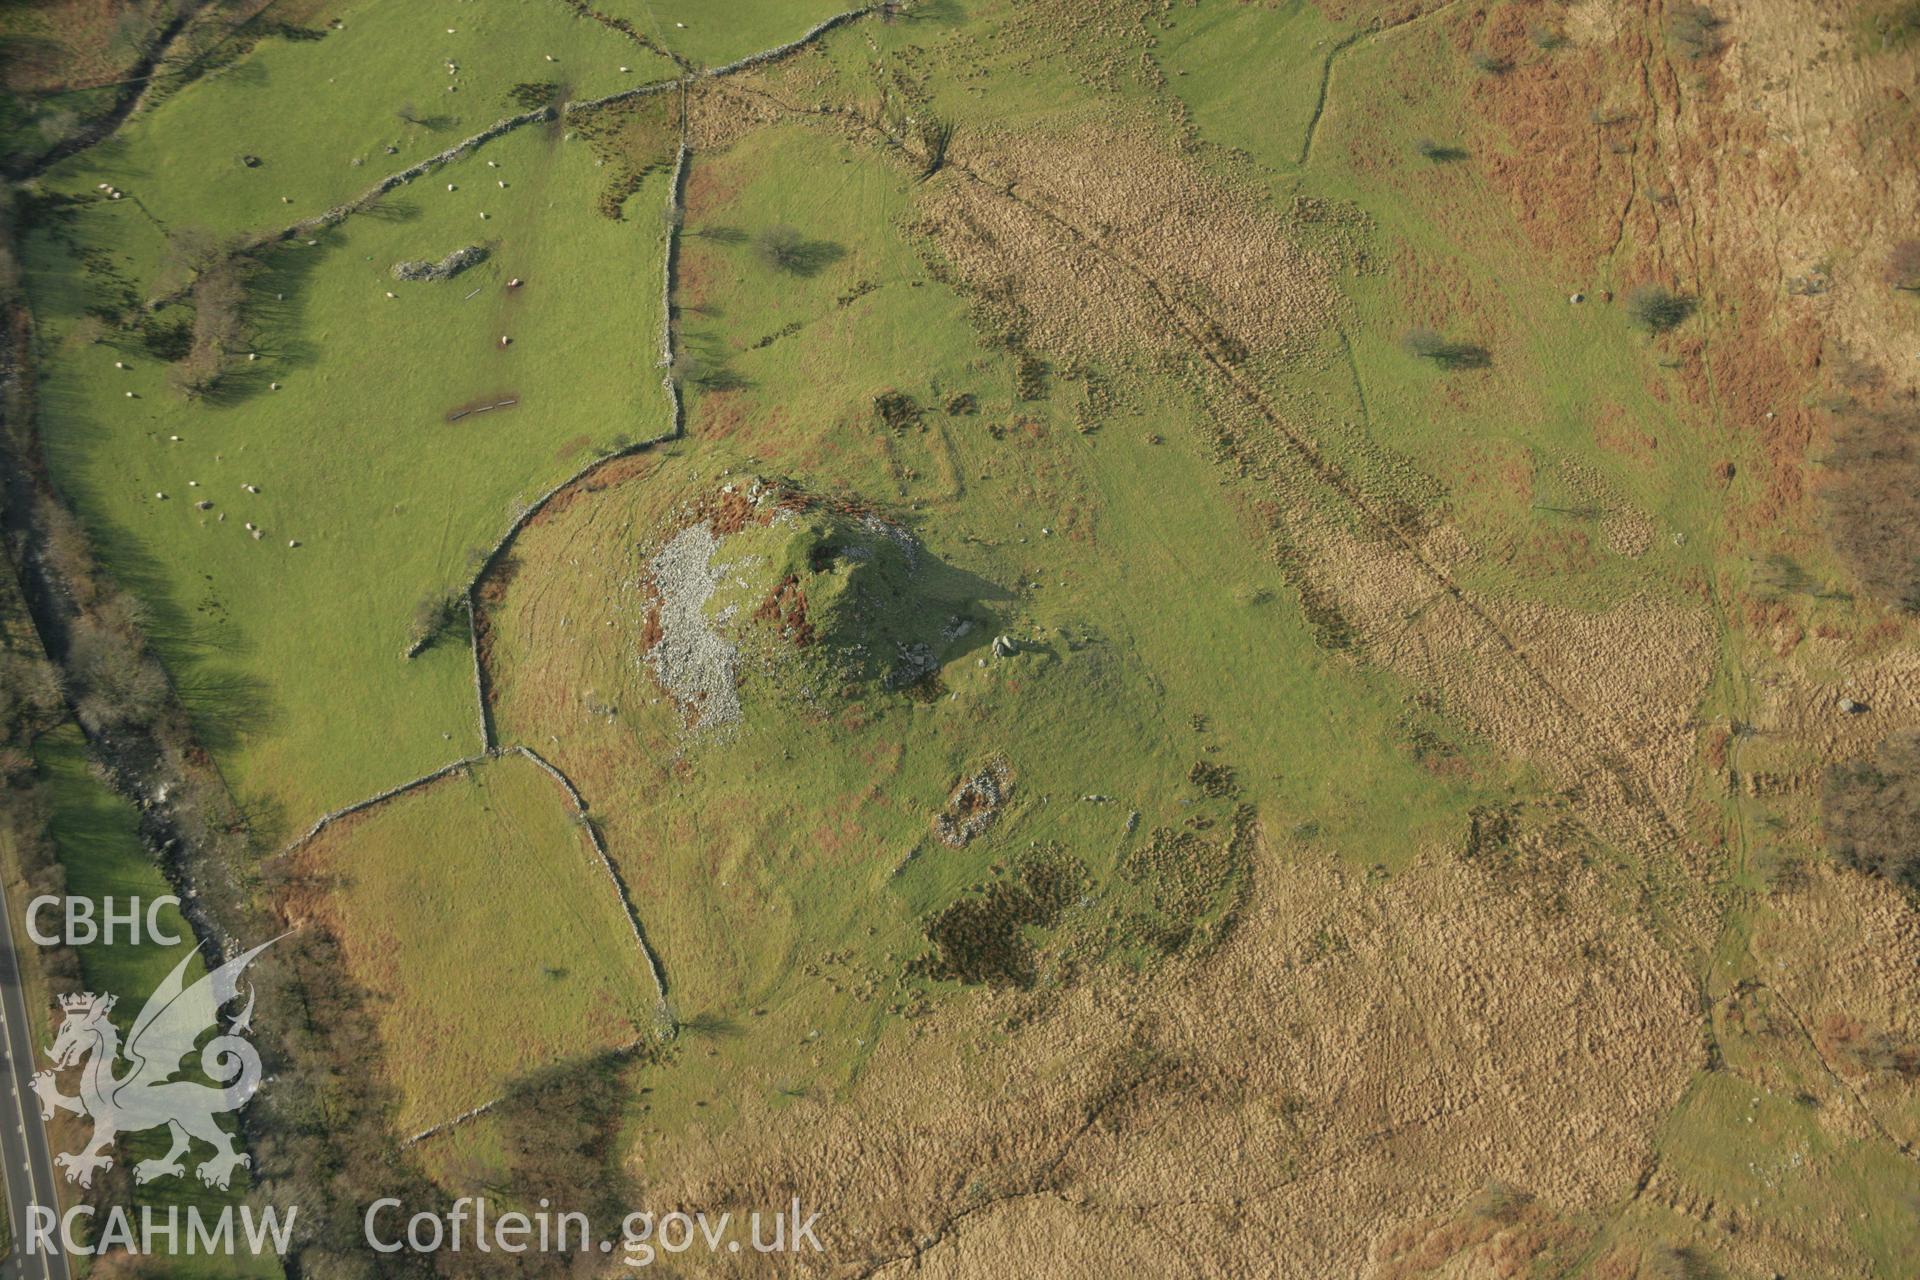 RCAHMW colour oblique aerial photograph of Castell Prysor. Taken on 25 January 2007 by Toby Driver